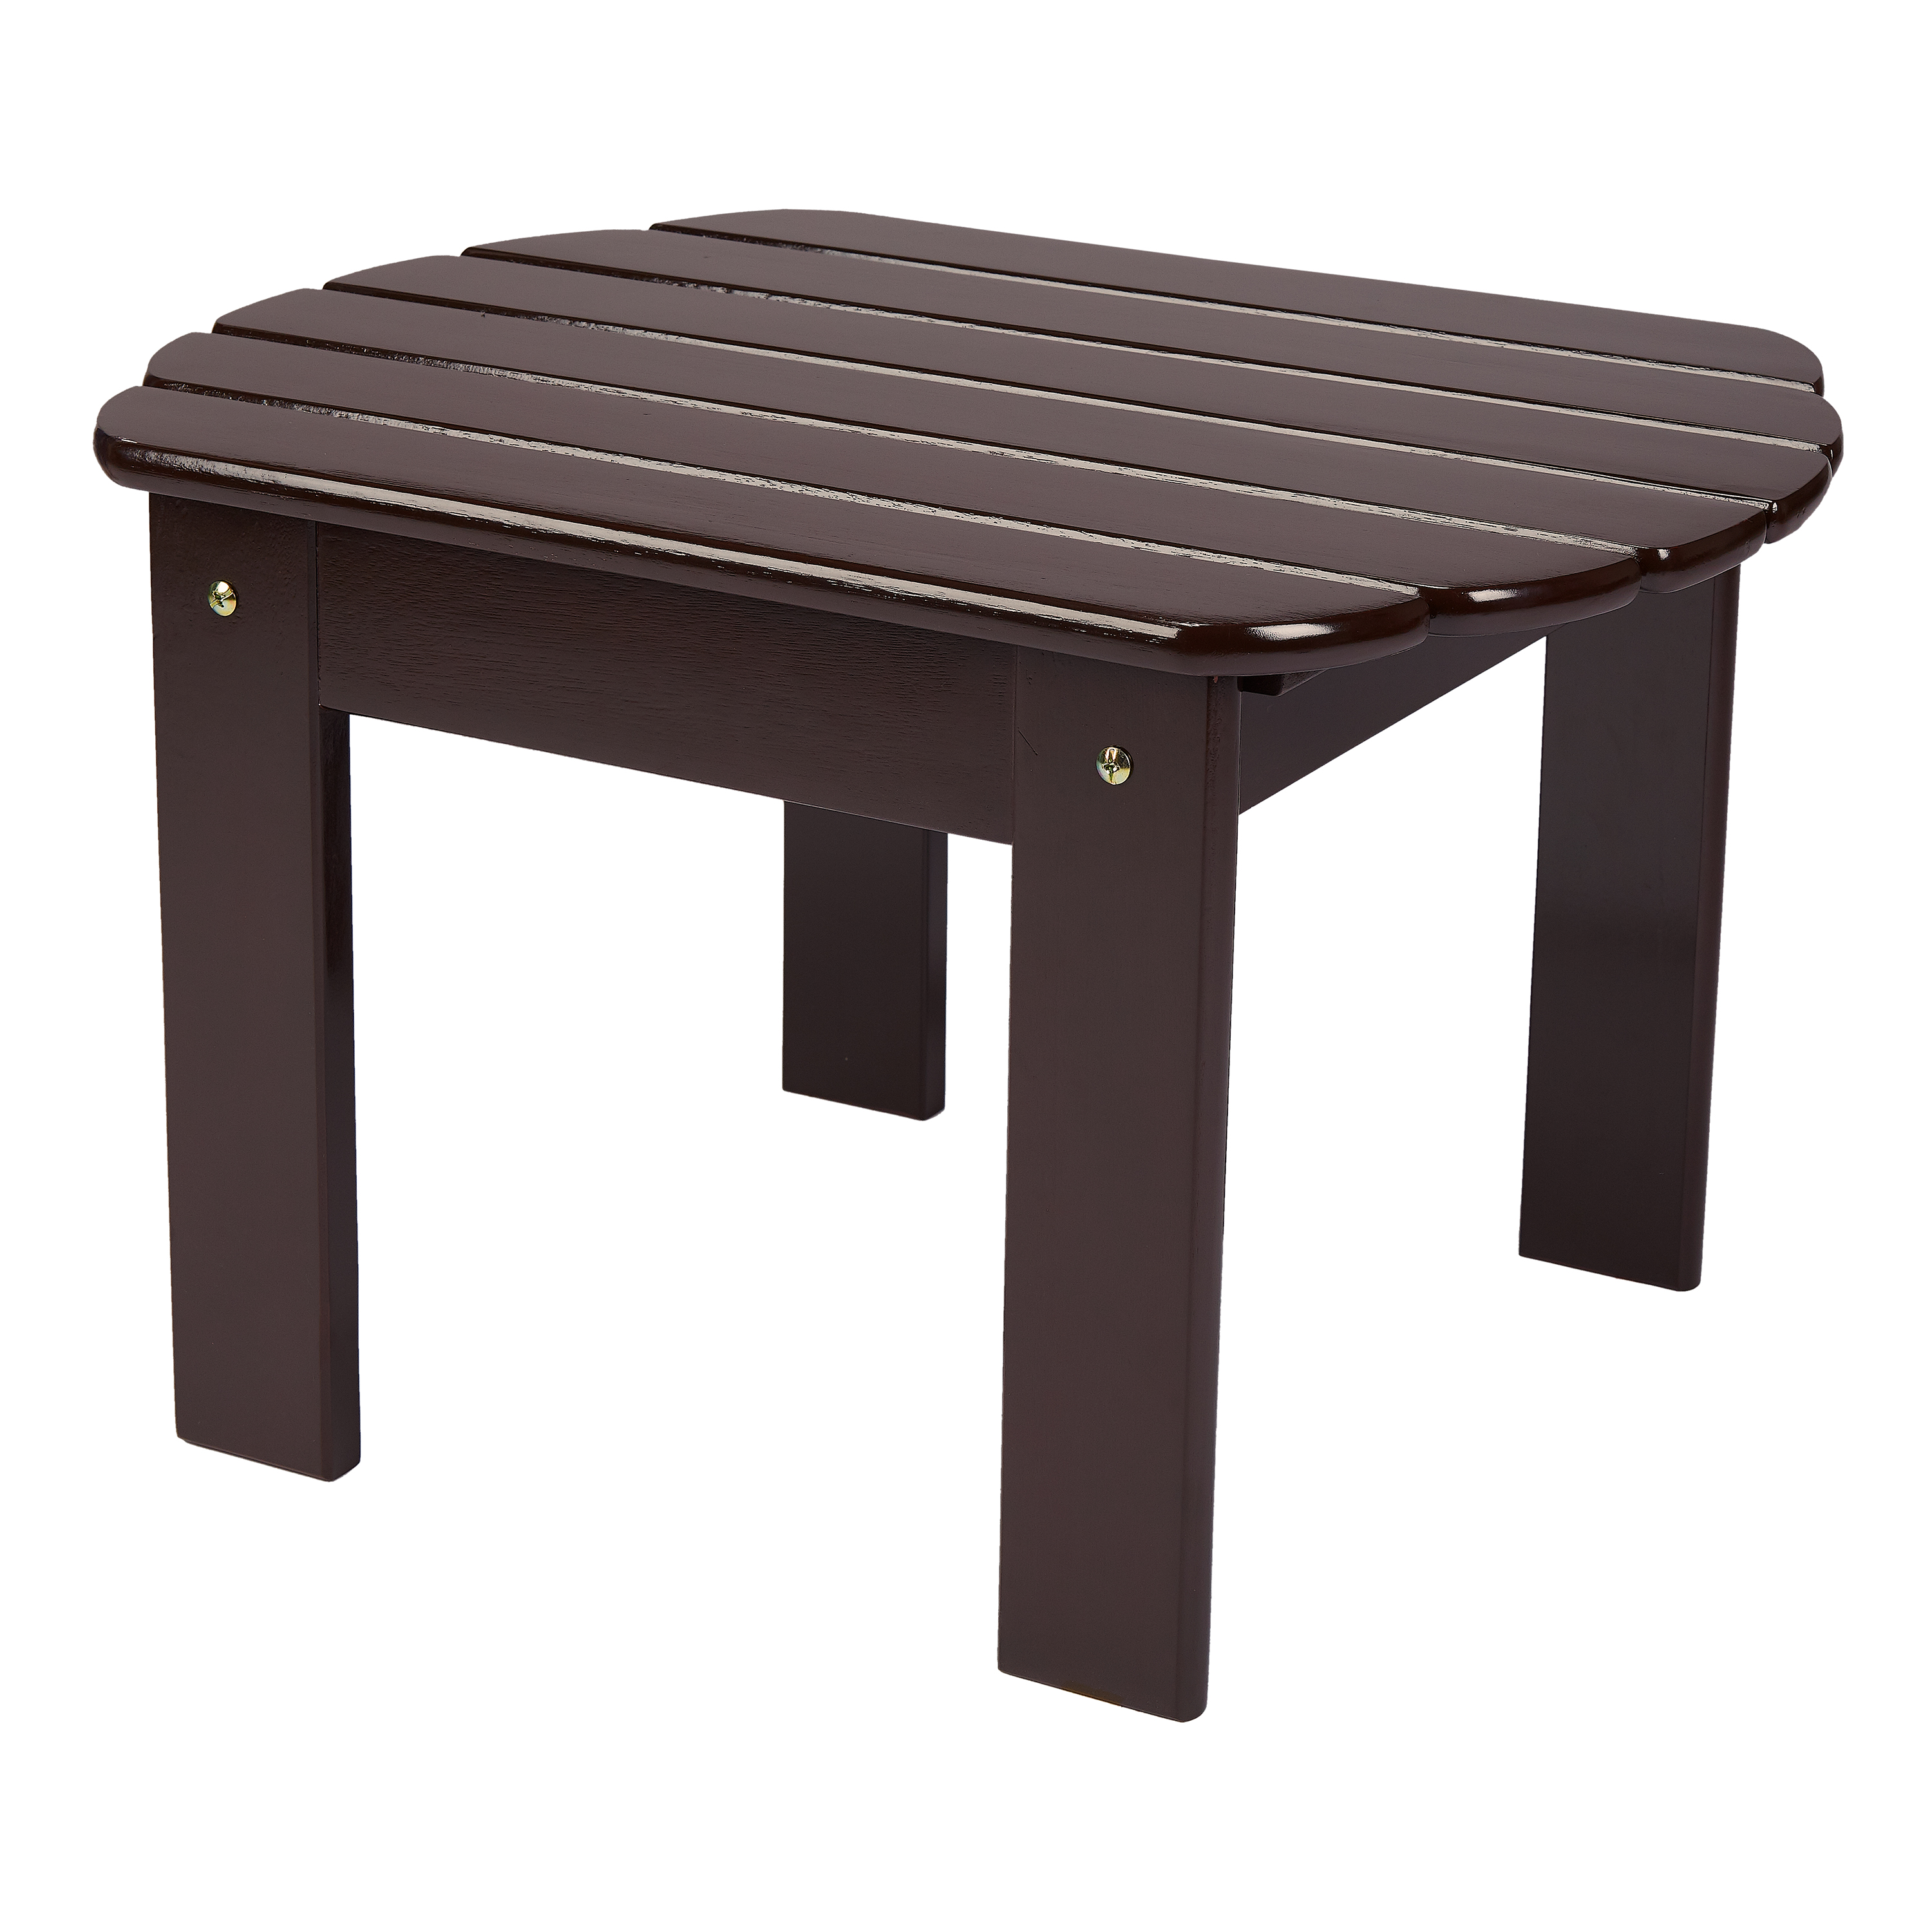 Mainstays Wood Adirondack Outdoor Side Table, Multiple Colors - image 1 of 5